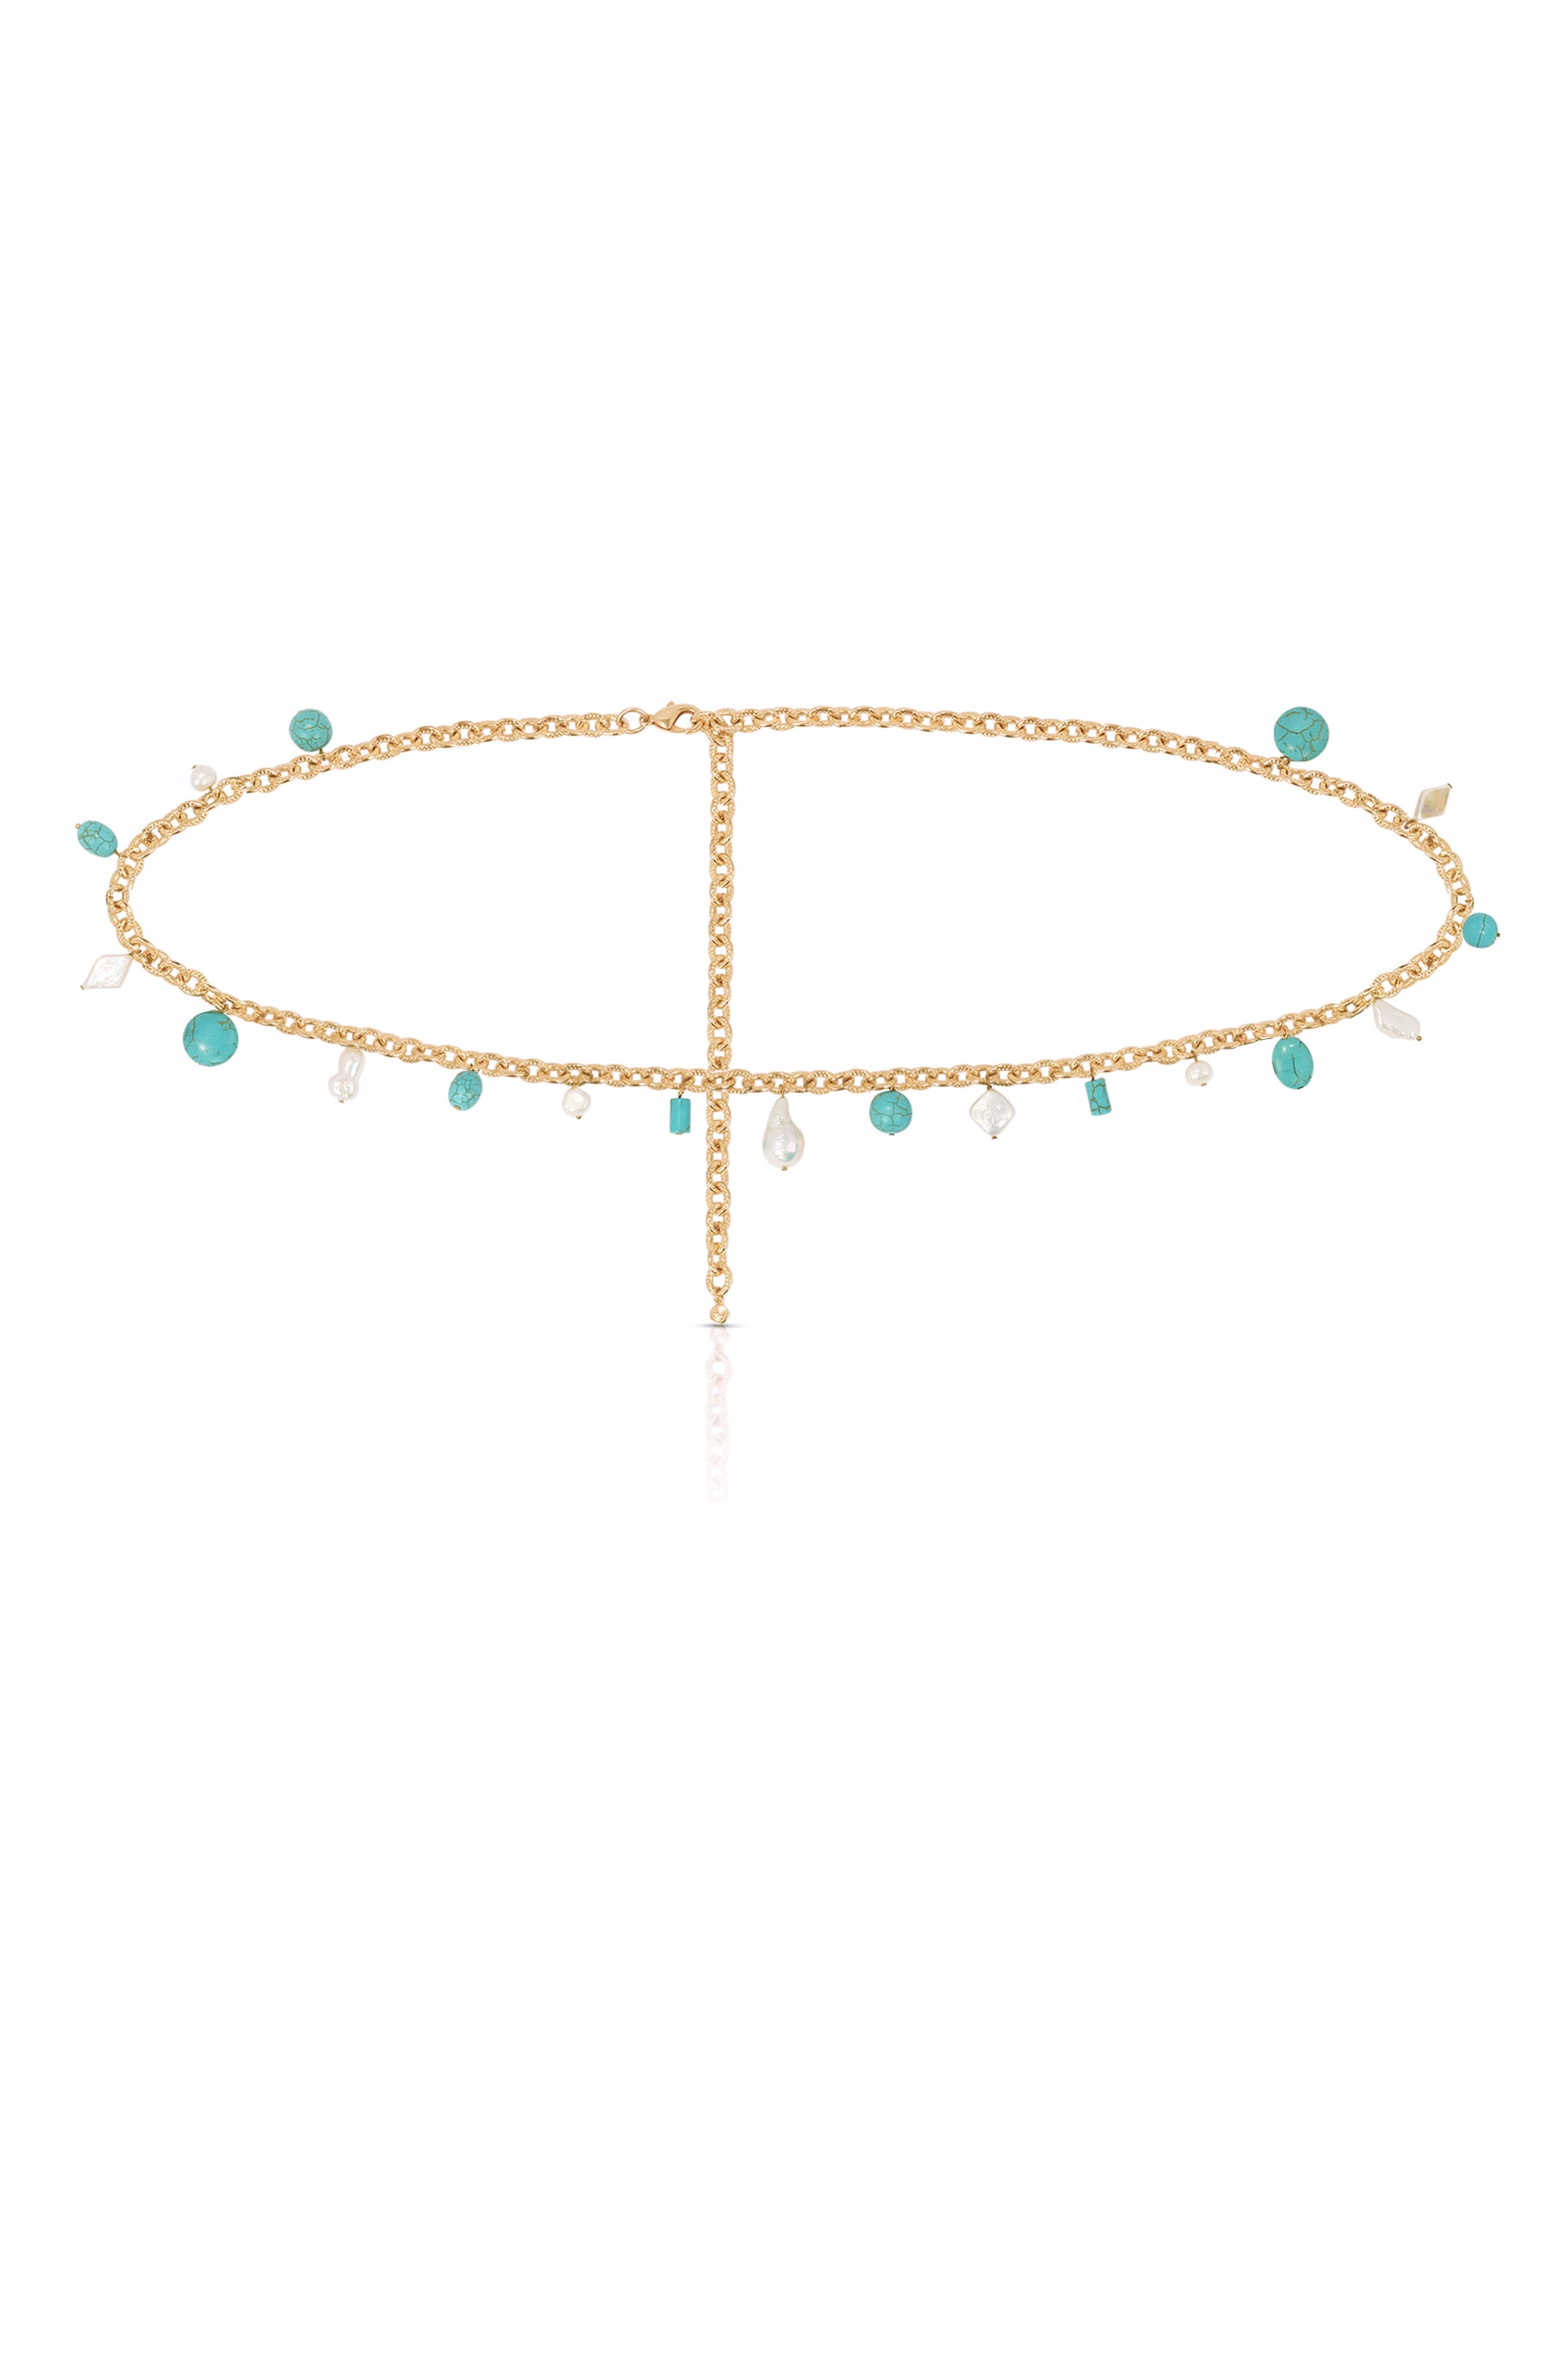 Tropical Turquoise and Pearl Waist Chain